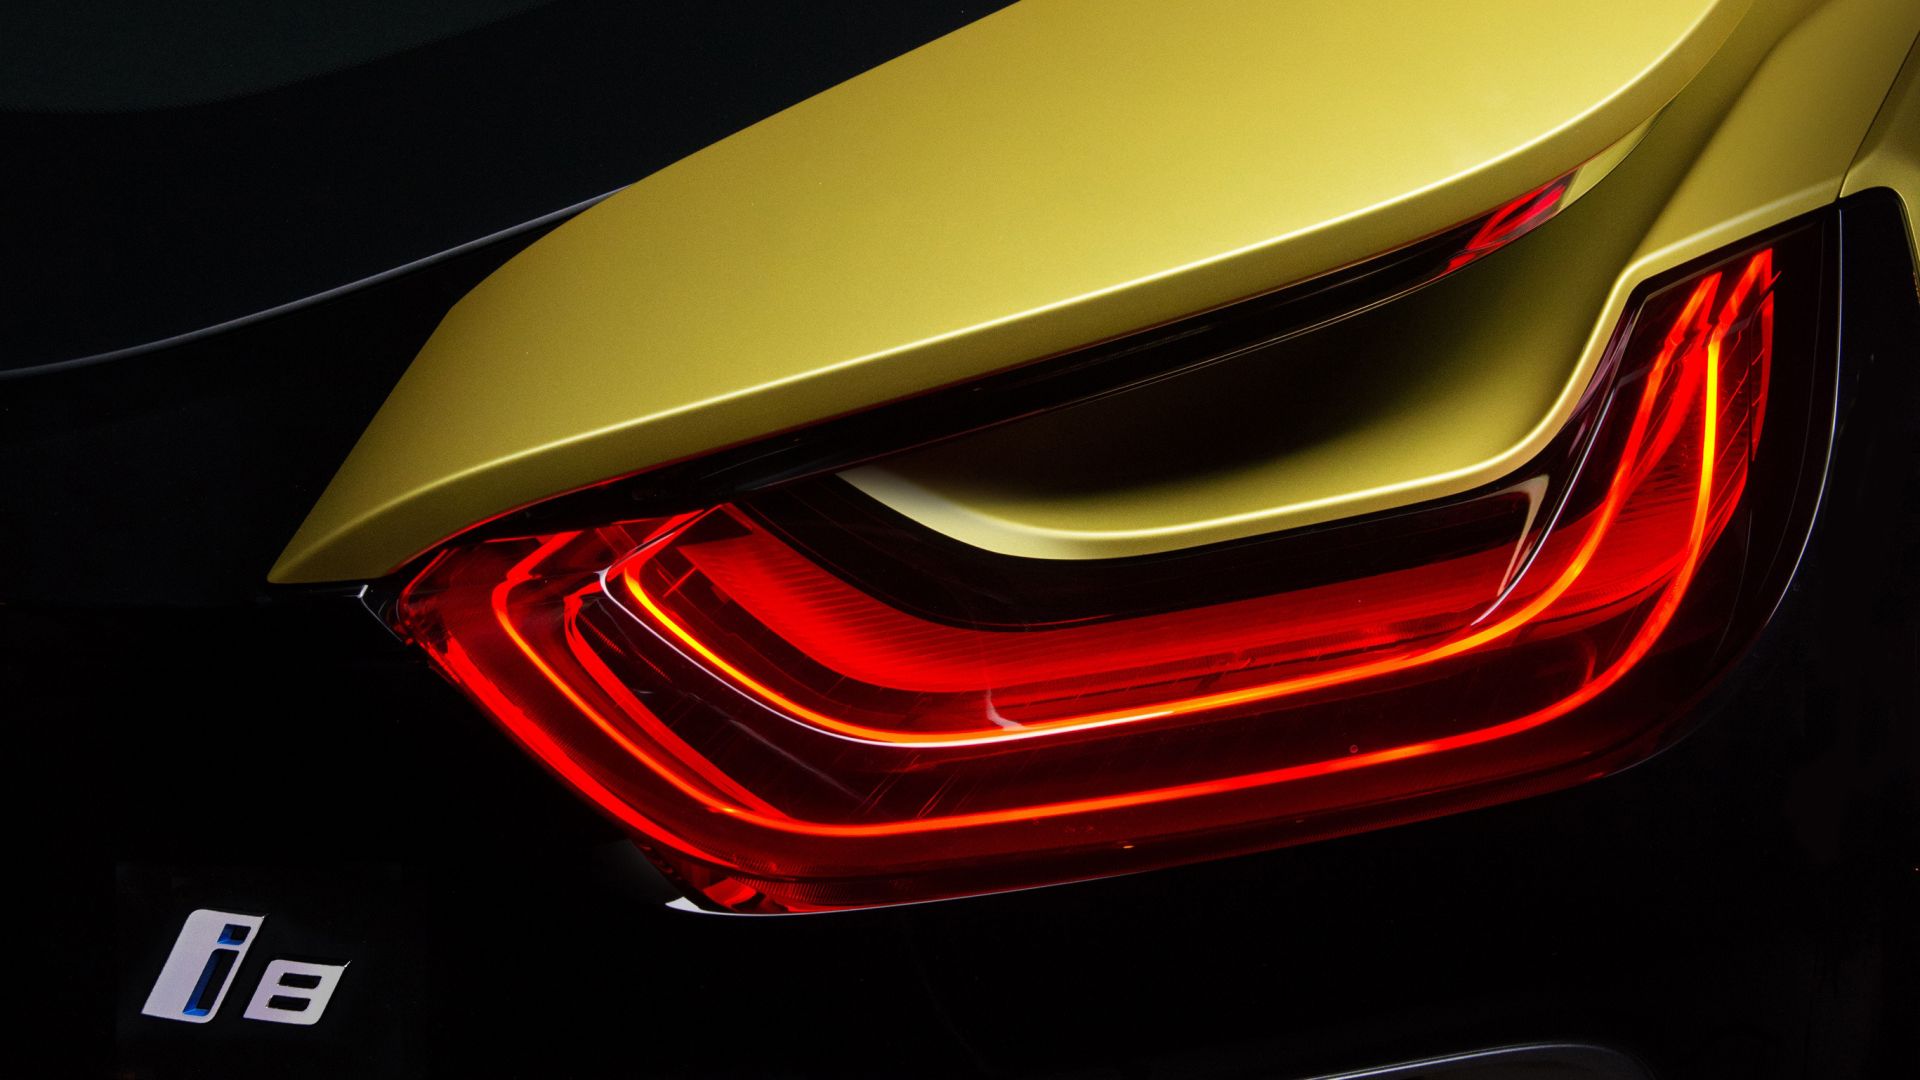 Desktop wallpaper 2018 bmw i frozen yellow edition, taillight, close up, HD image, picture, background, 27af4c